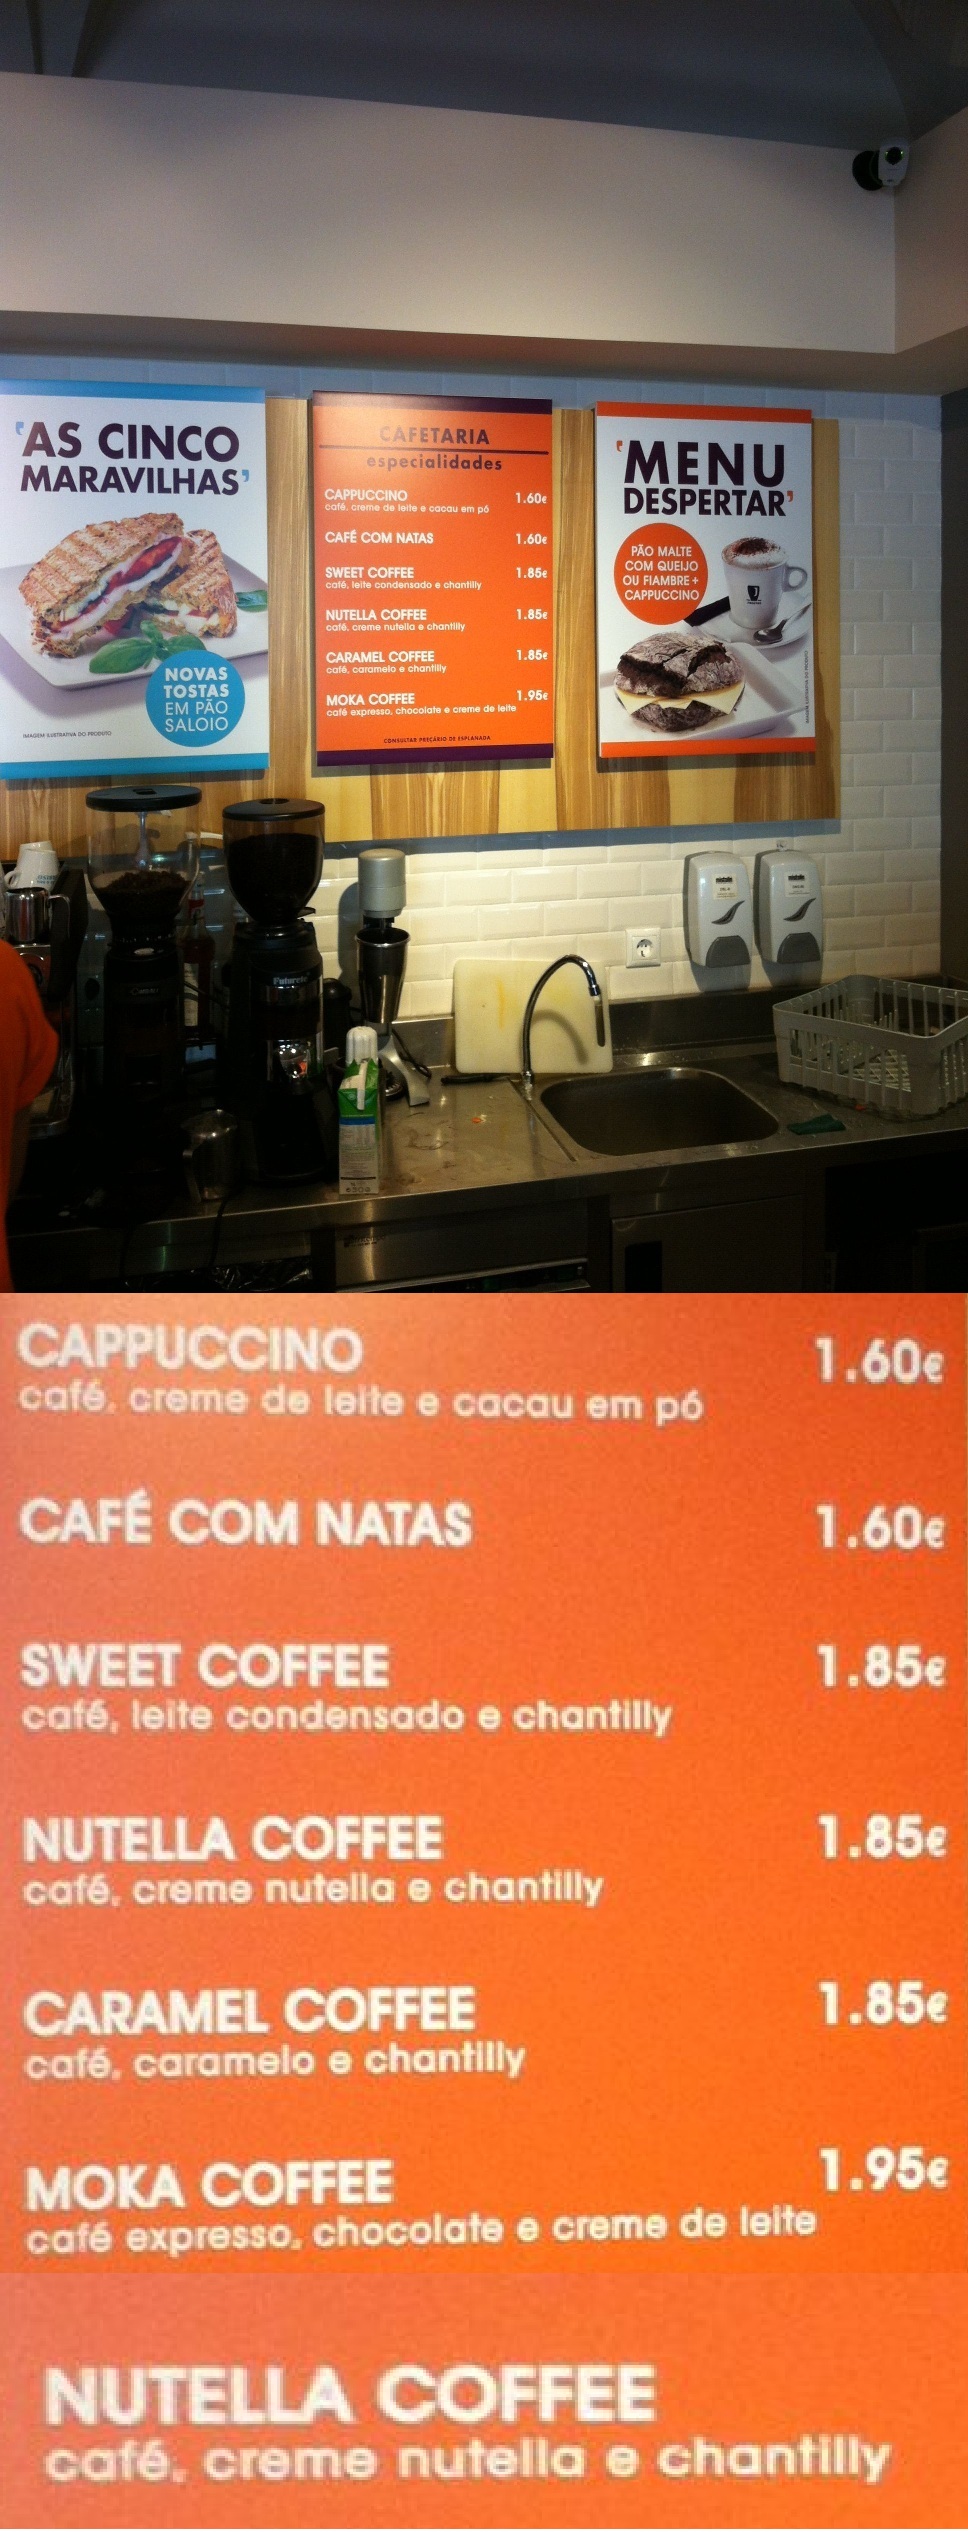 Meanwhile, in Lisbon... Nutella Coffee